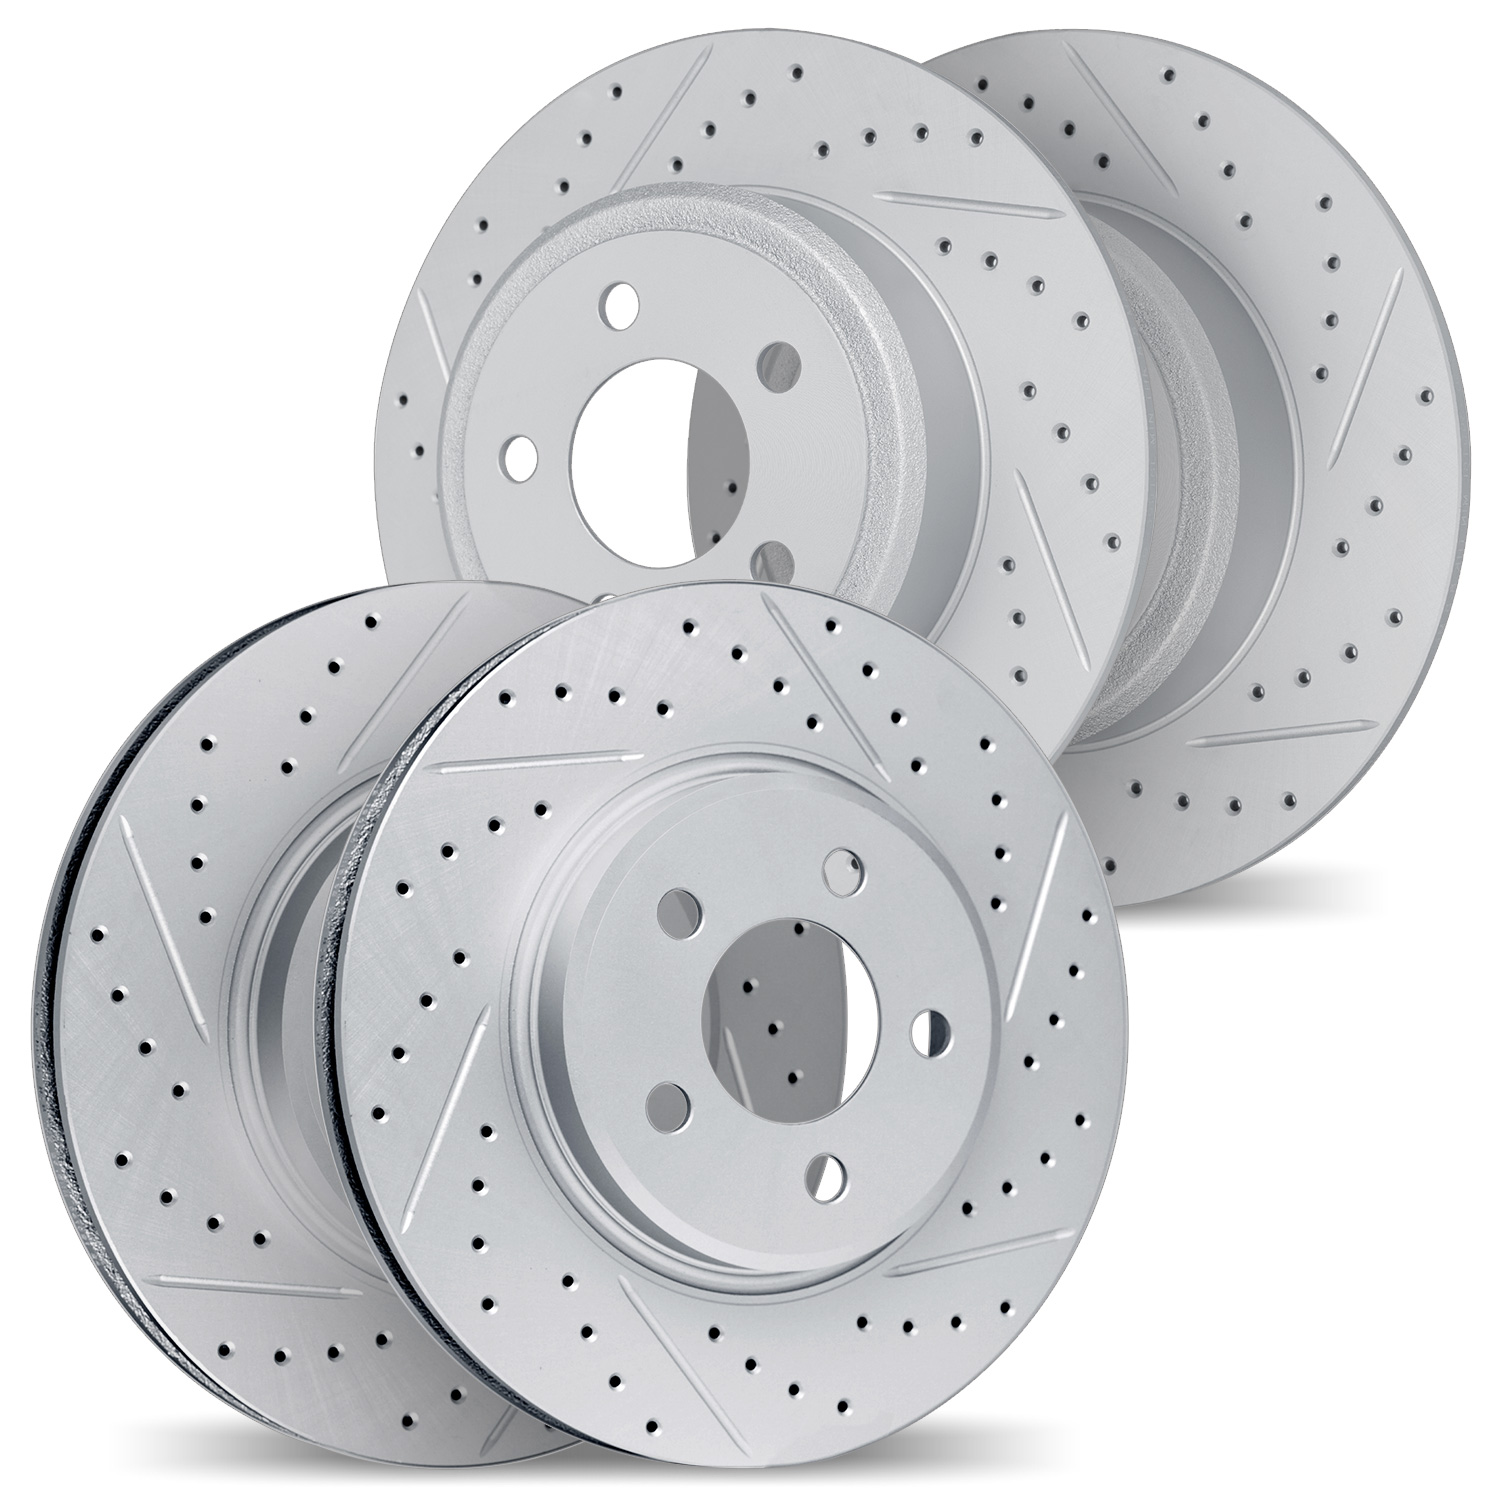 2004-58002 Geoperformance Drilled/Slotted Brake Rotors, 2017-2020 Acura/Honda, Position: Front and Rear